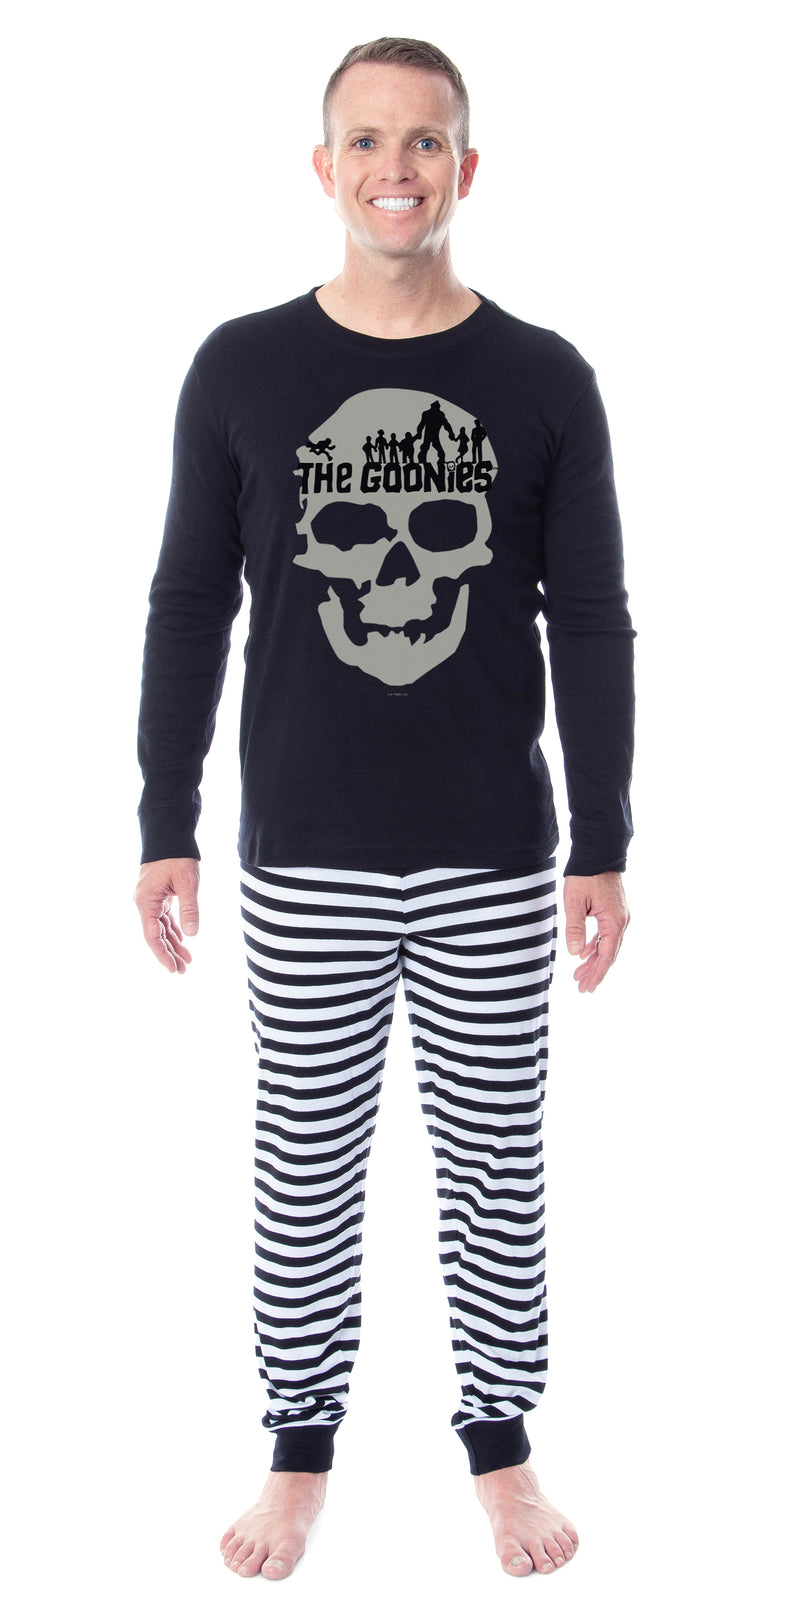 The Goonies Skull Logo Cotton Matching Family Pajama Set For Adults And Kids